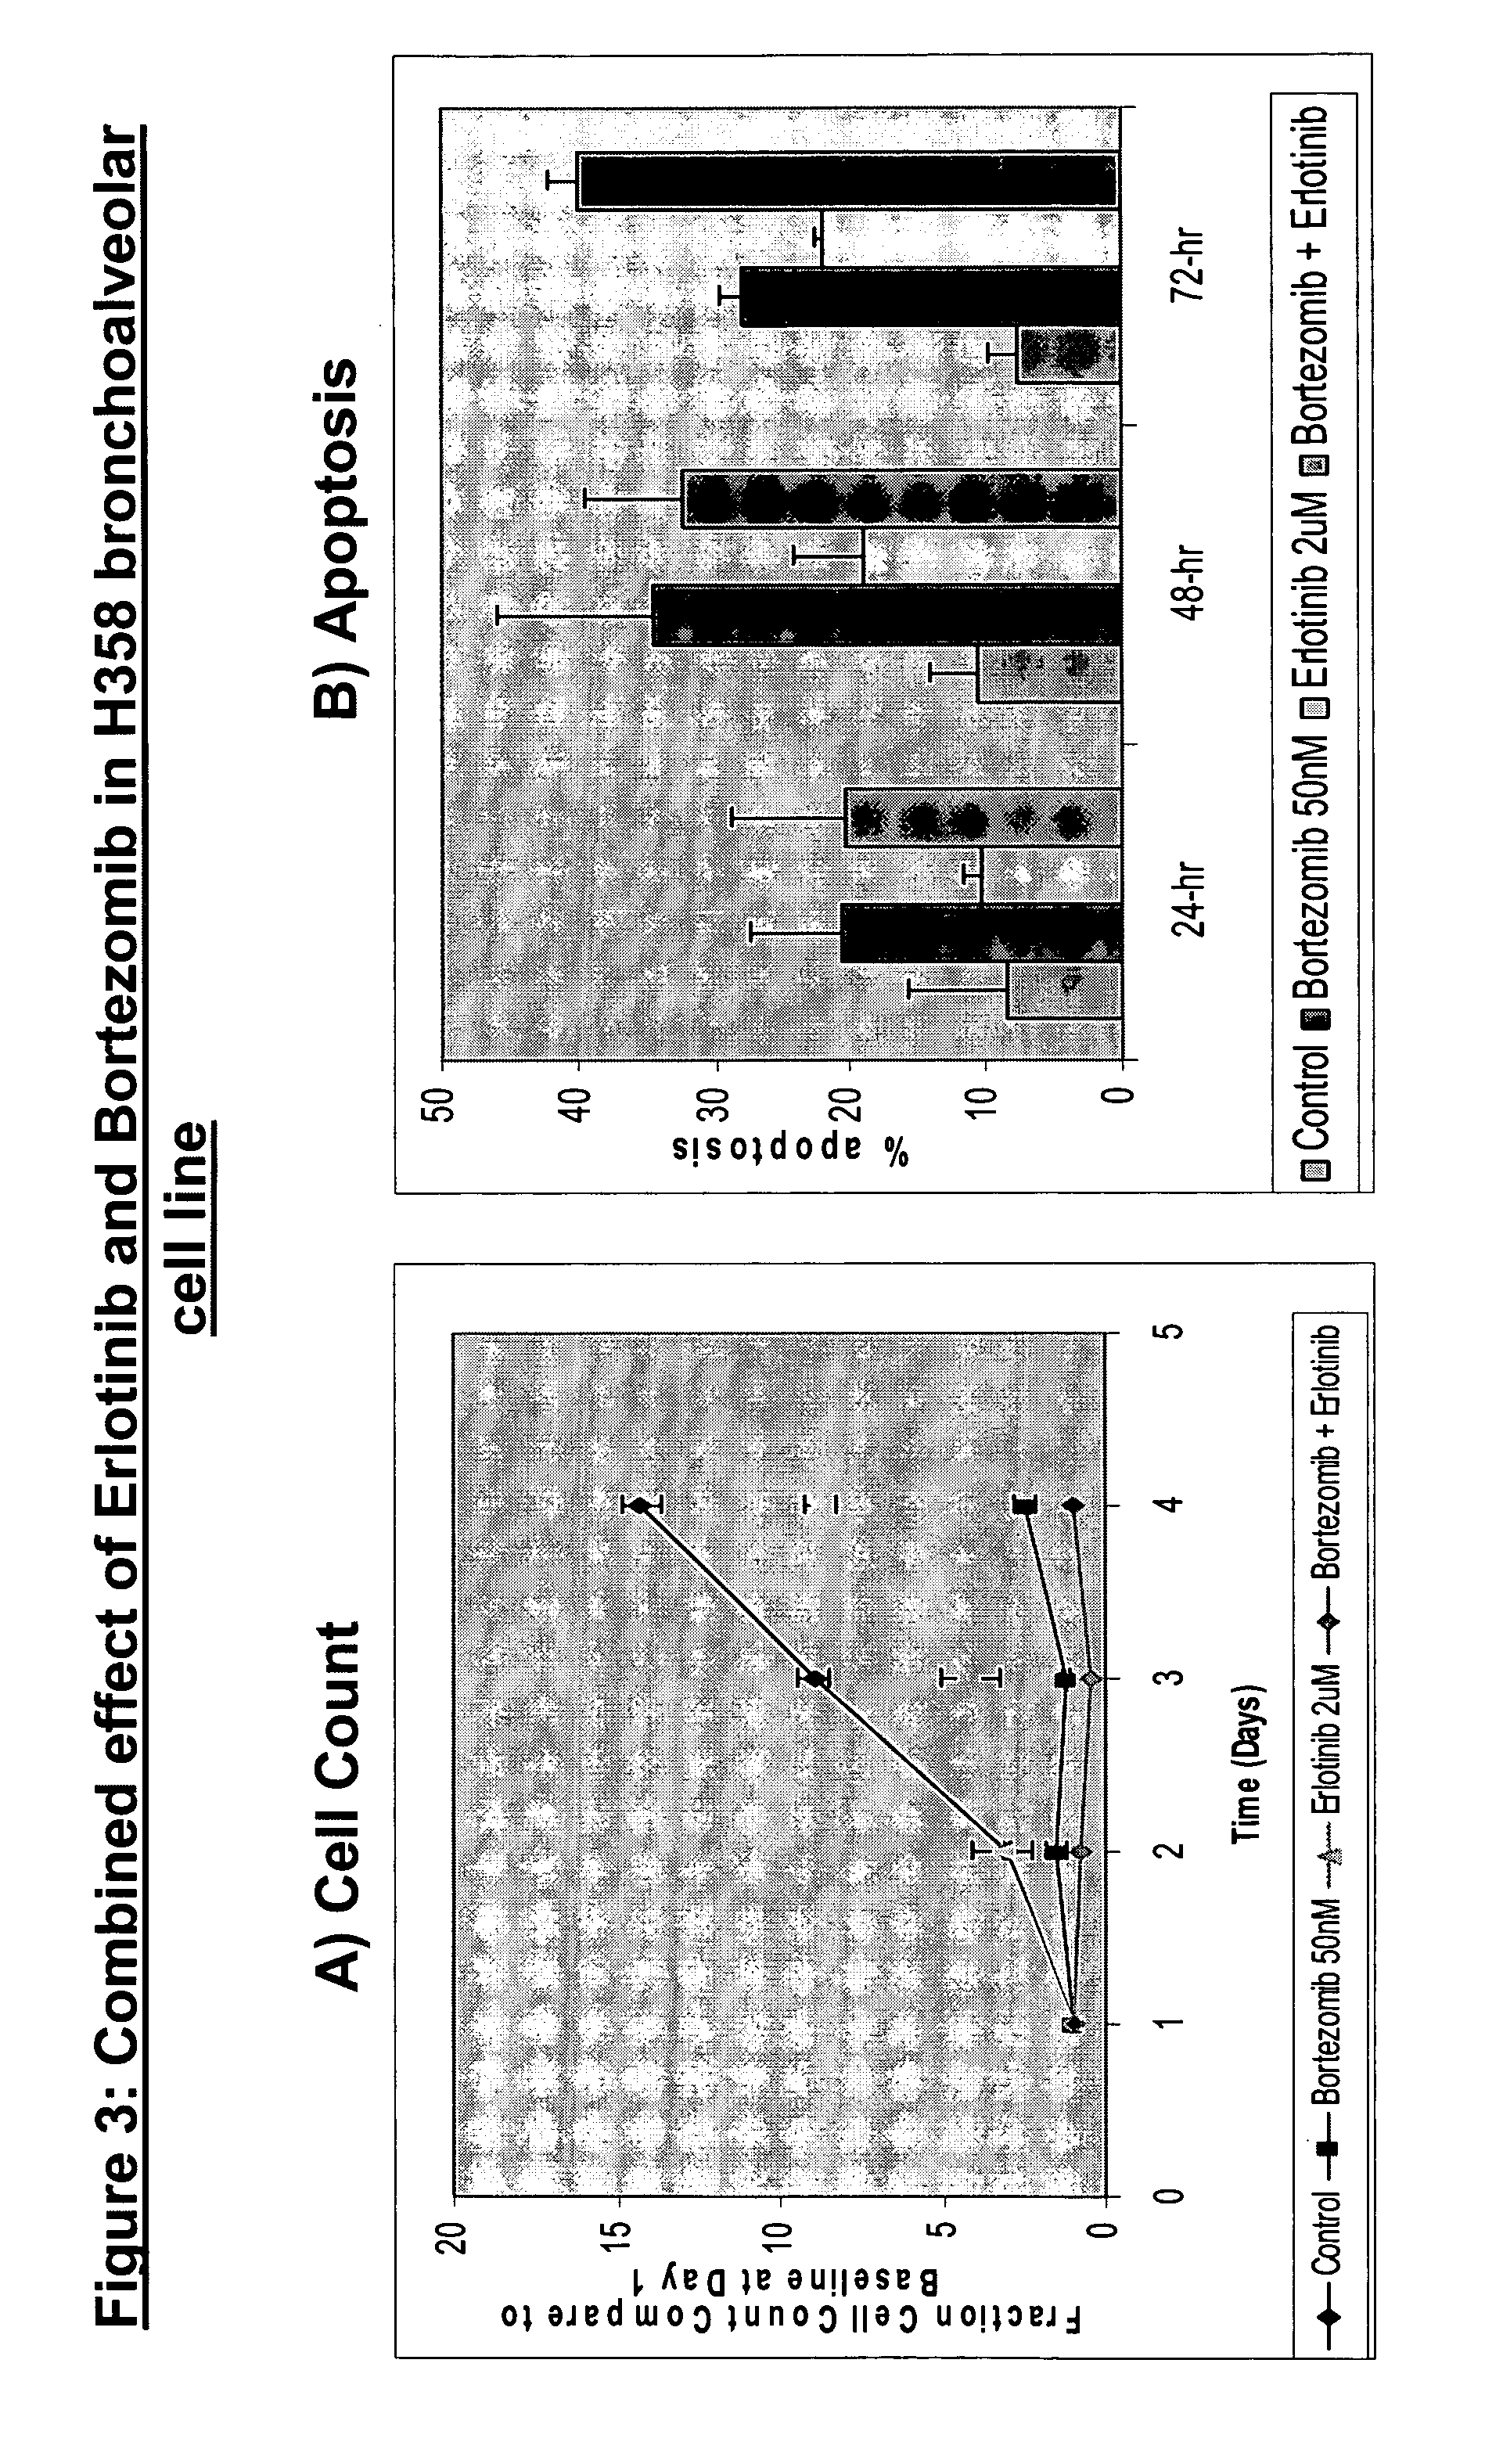 Combined treatment with bortezomib and an epidermal growth factor receptor kinase inhibitor